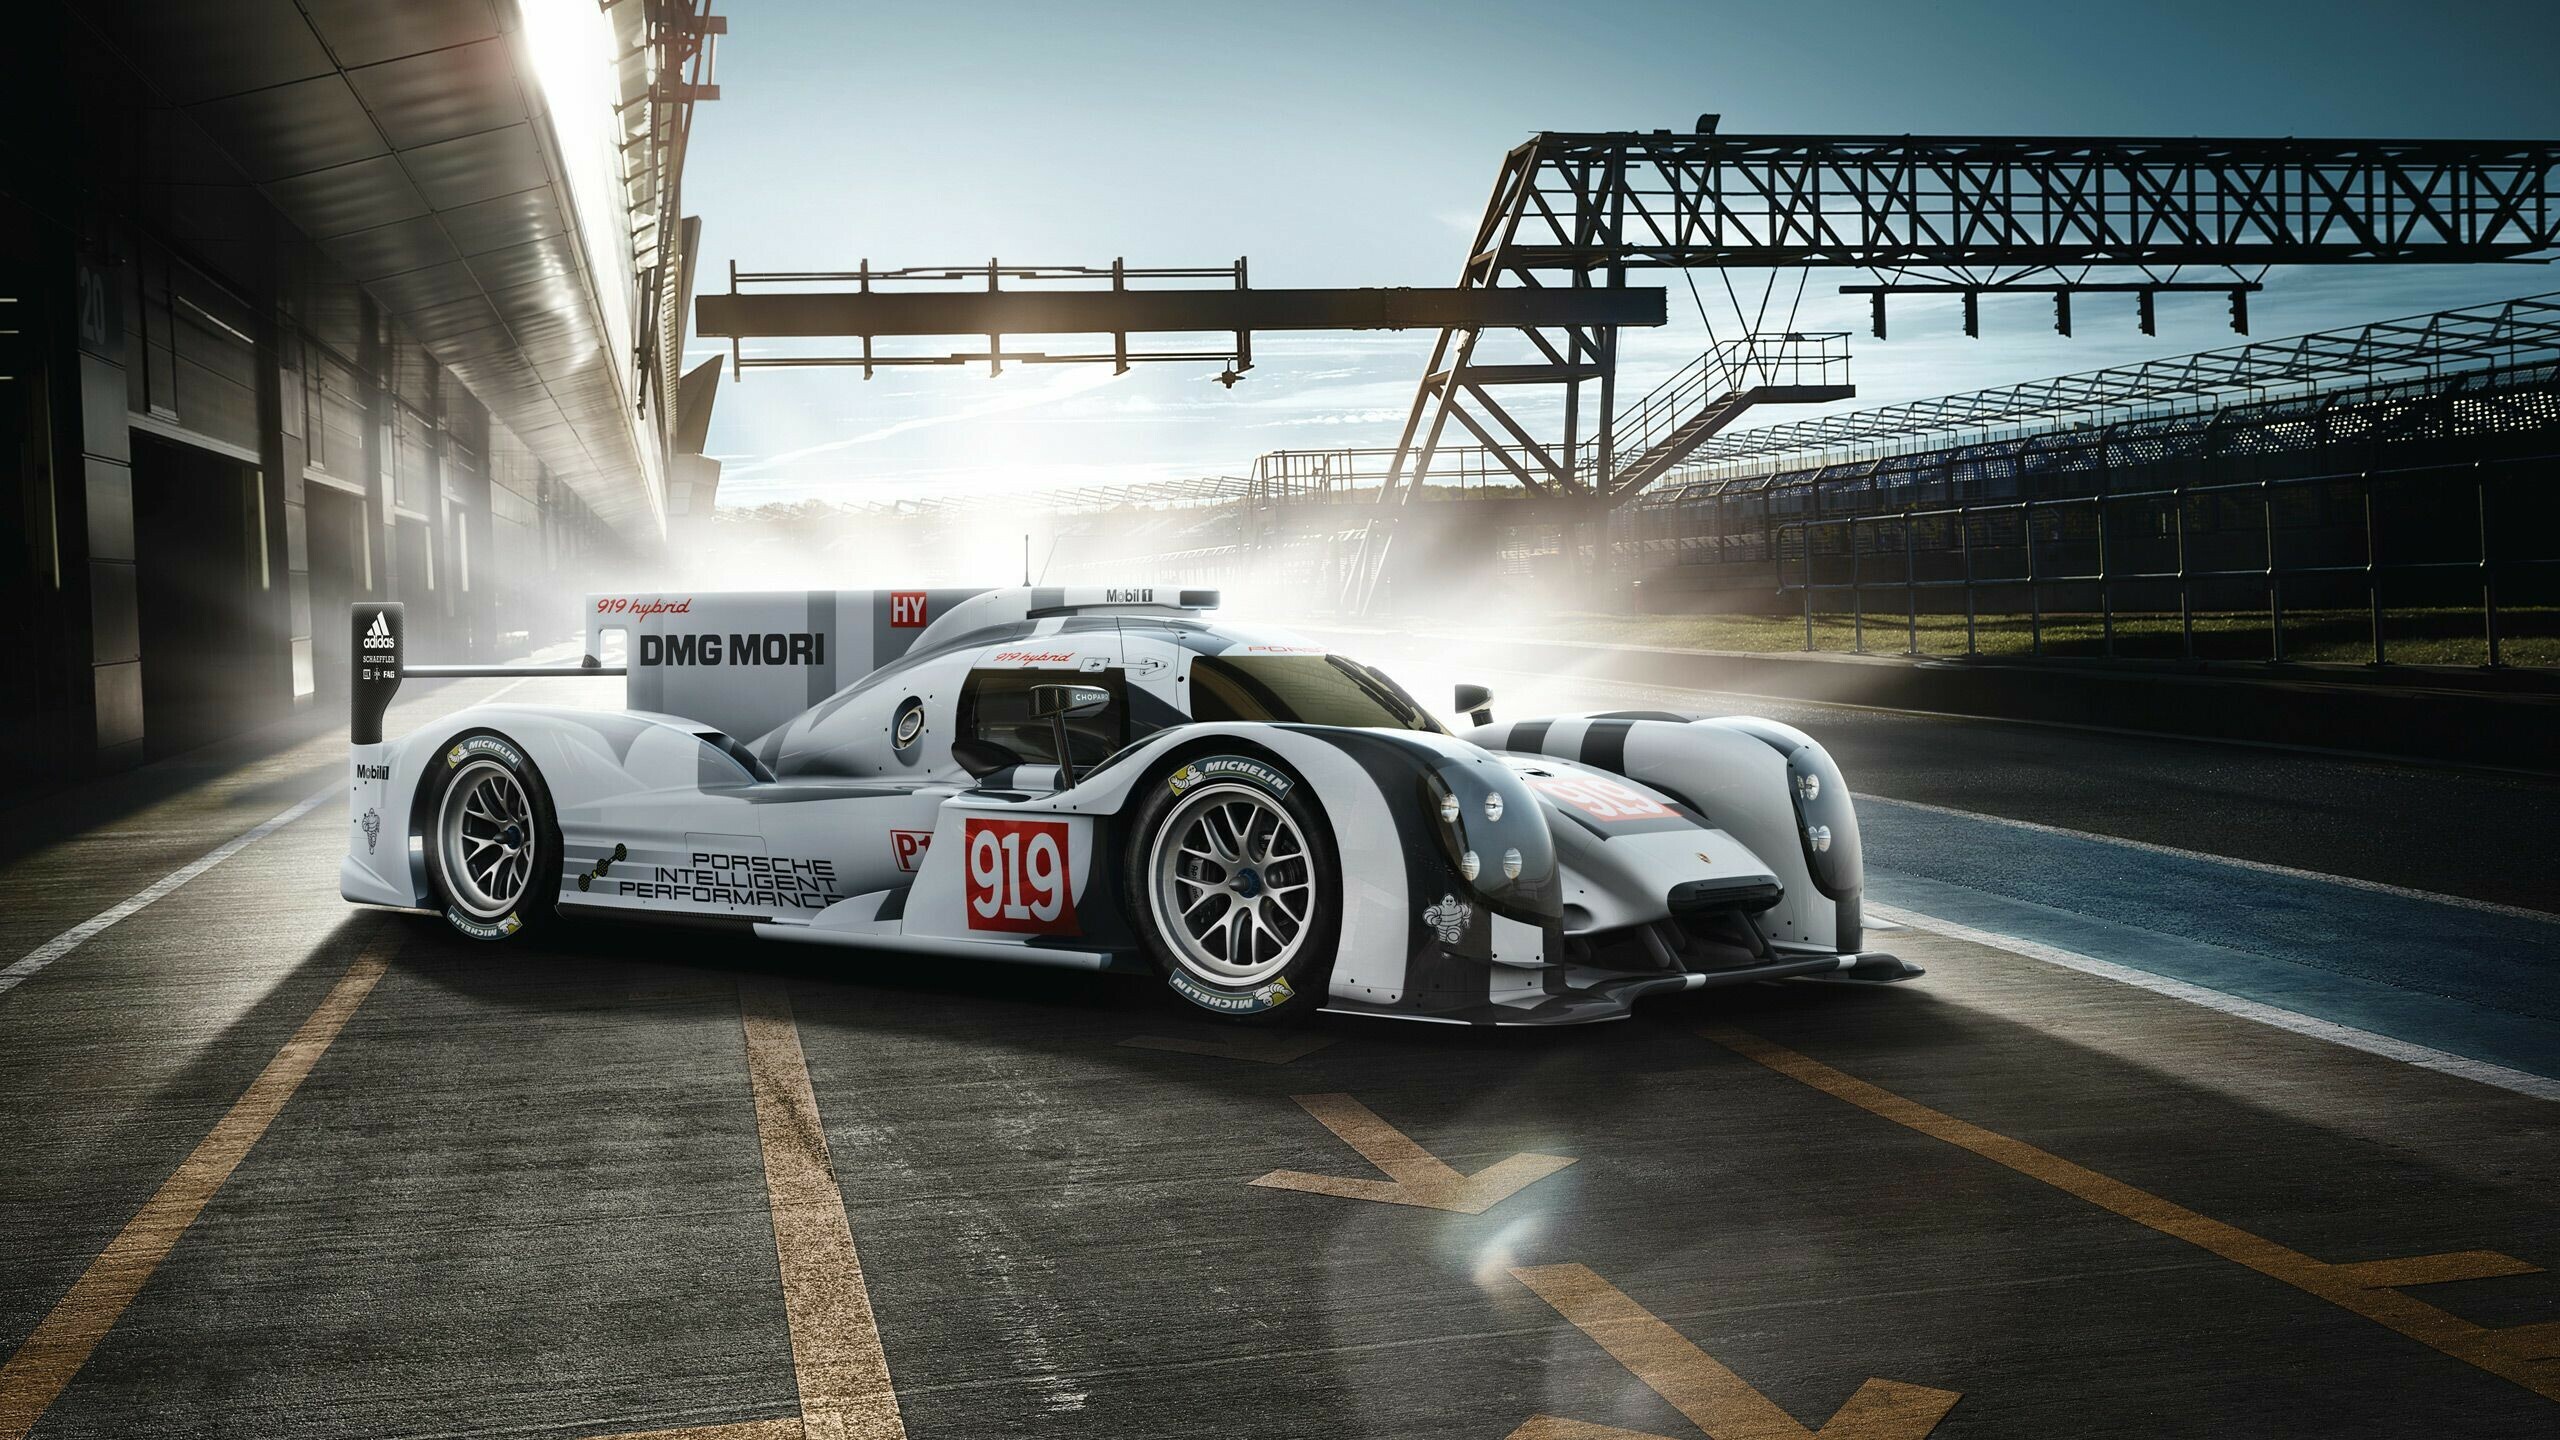 Porsche: 919 Hybrid, A Le Mans Prototype 1 racing car built and used by the company in the 2014, 2015, 2016, and 2017 seasons of the FIA World Endurance Championship. 2560x1440 HD Wallpaper.